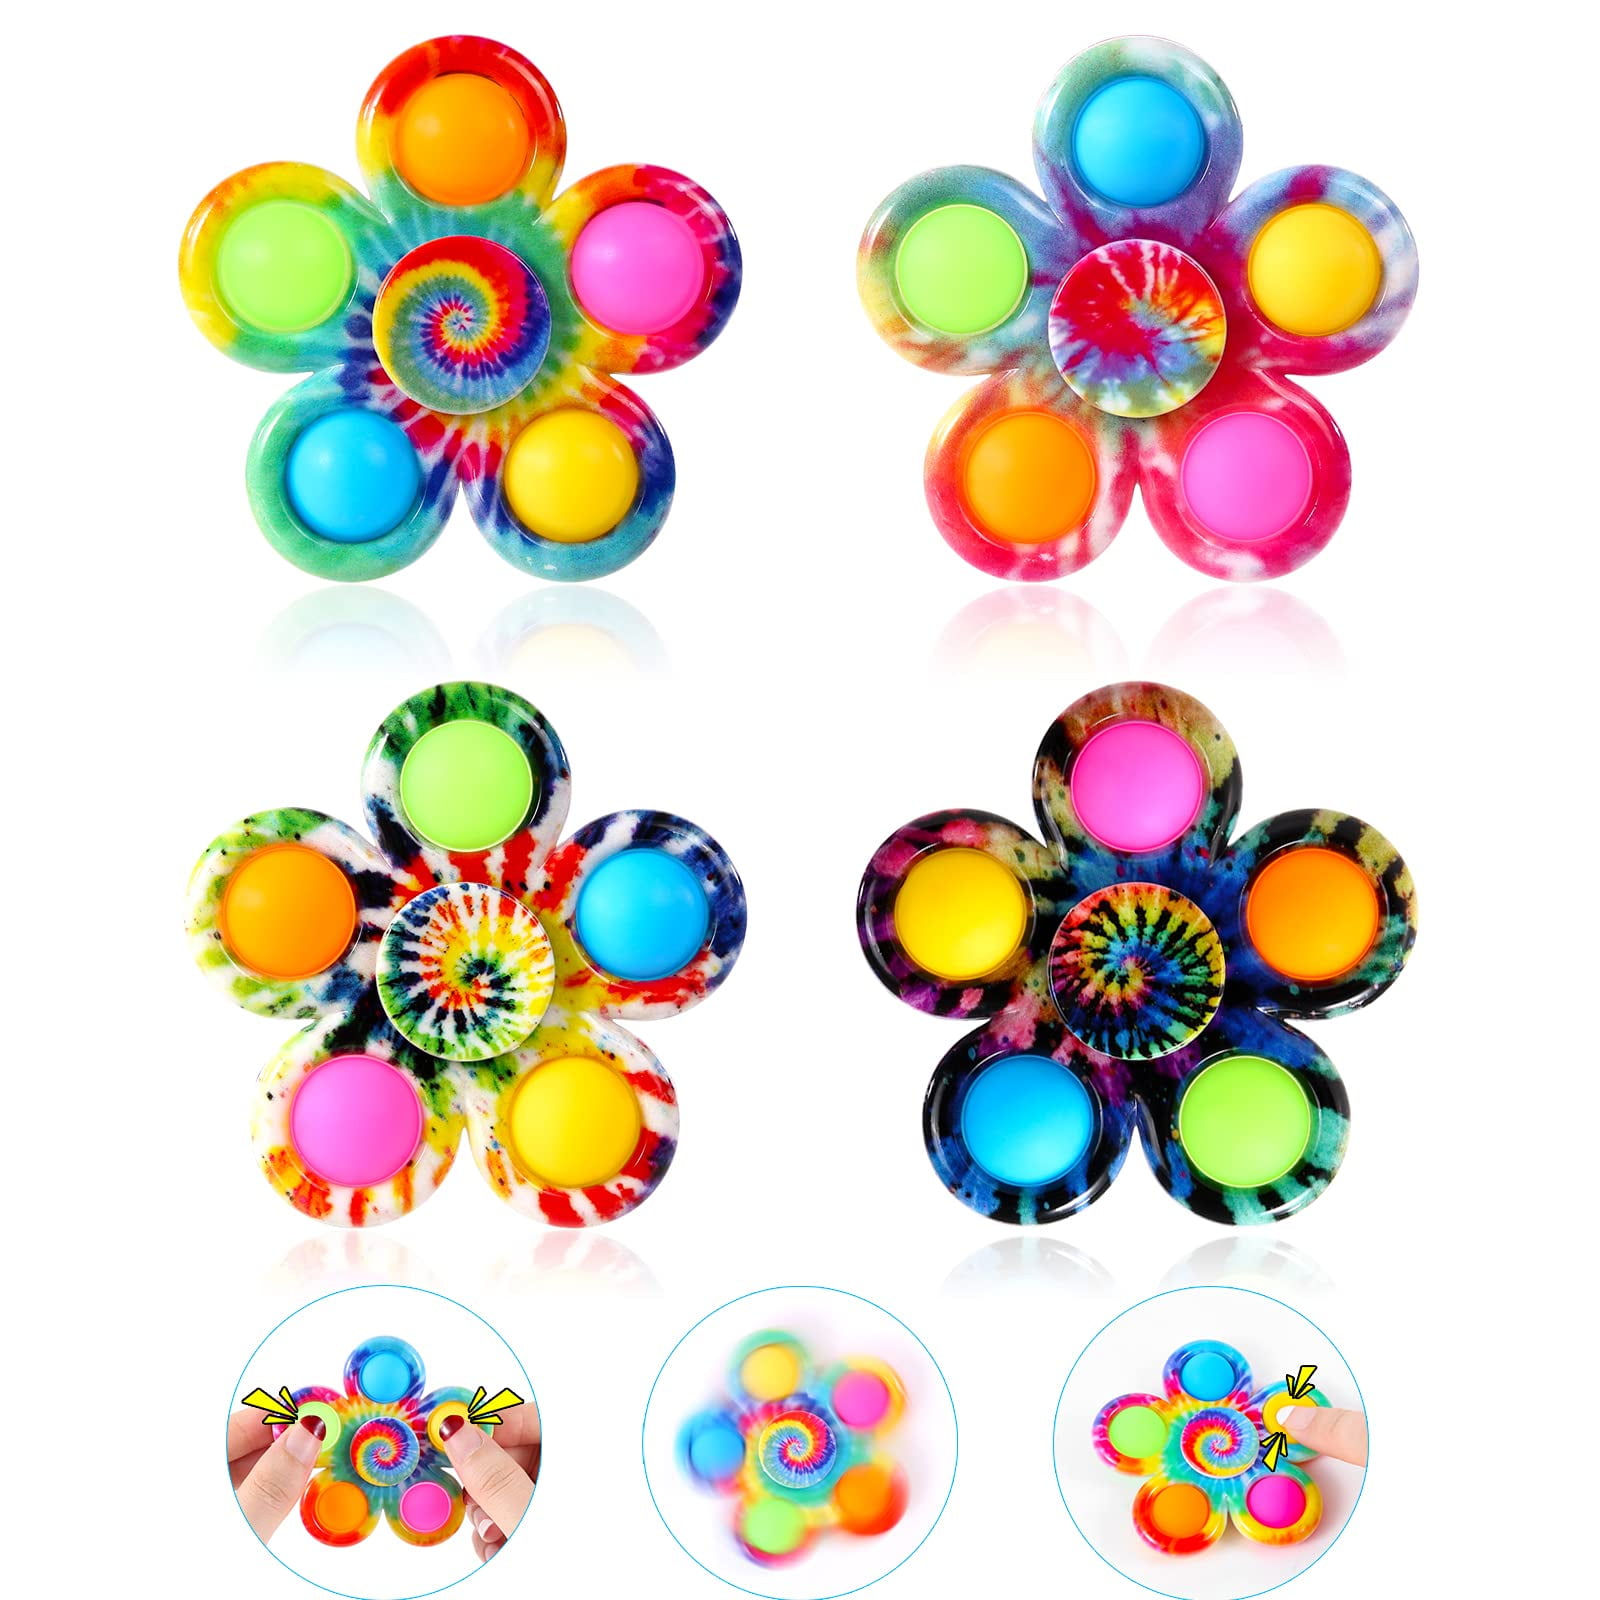 6 Pack Simple Dimple Fidget Toy 2 in 1 Push Pop Pop Fidget Spinner Finger Fidget Toy Pack with Pop for Kids Adults,ADHD Stress Autism Anxiety Stress Relief Reducer 